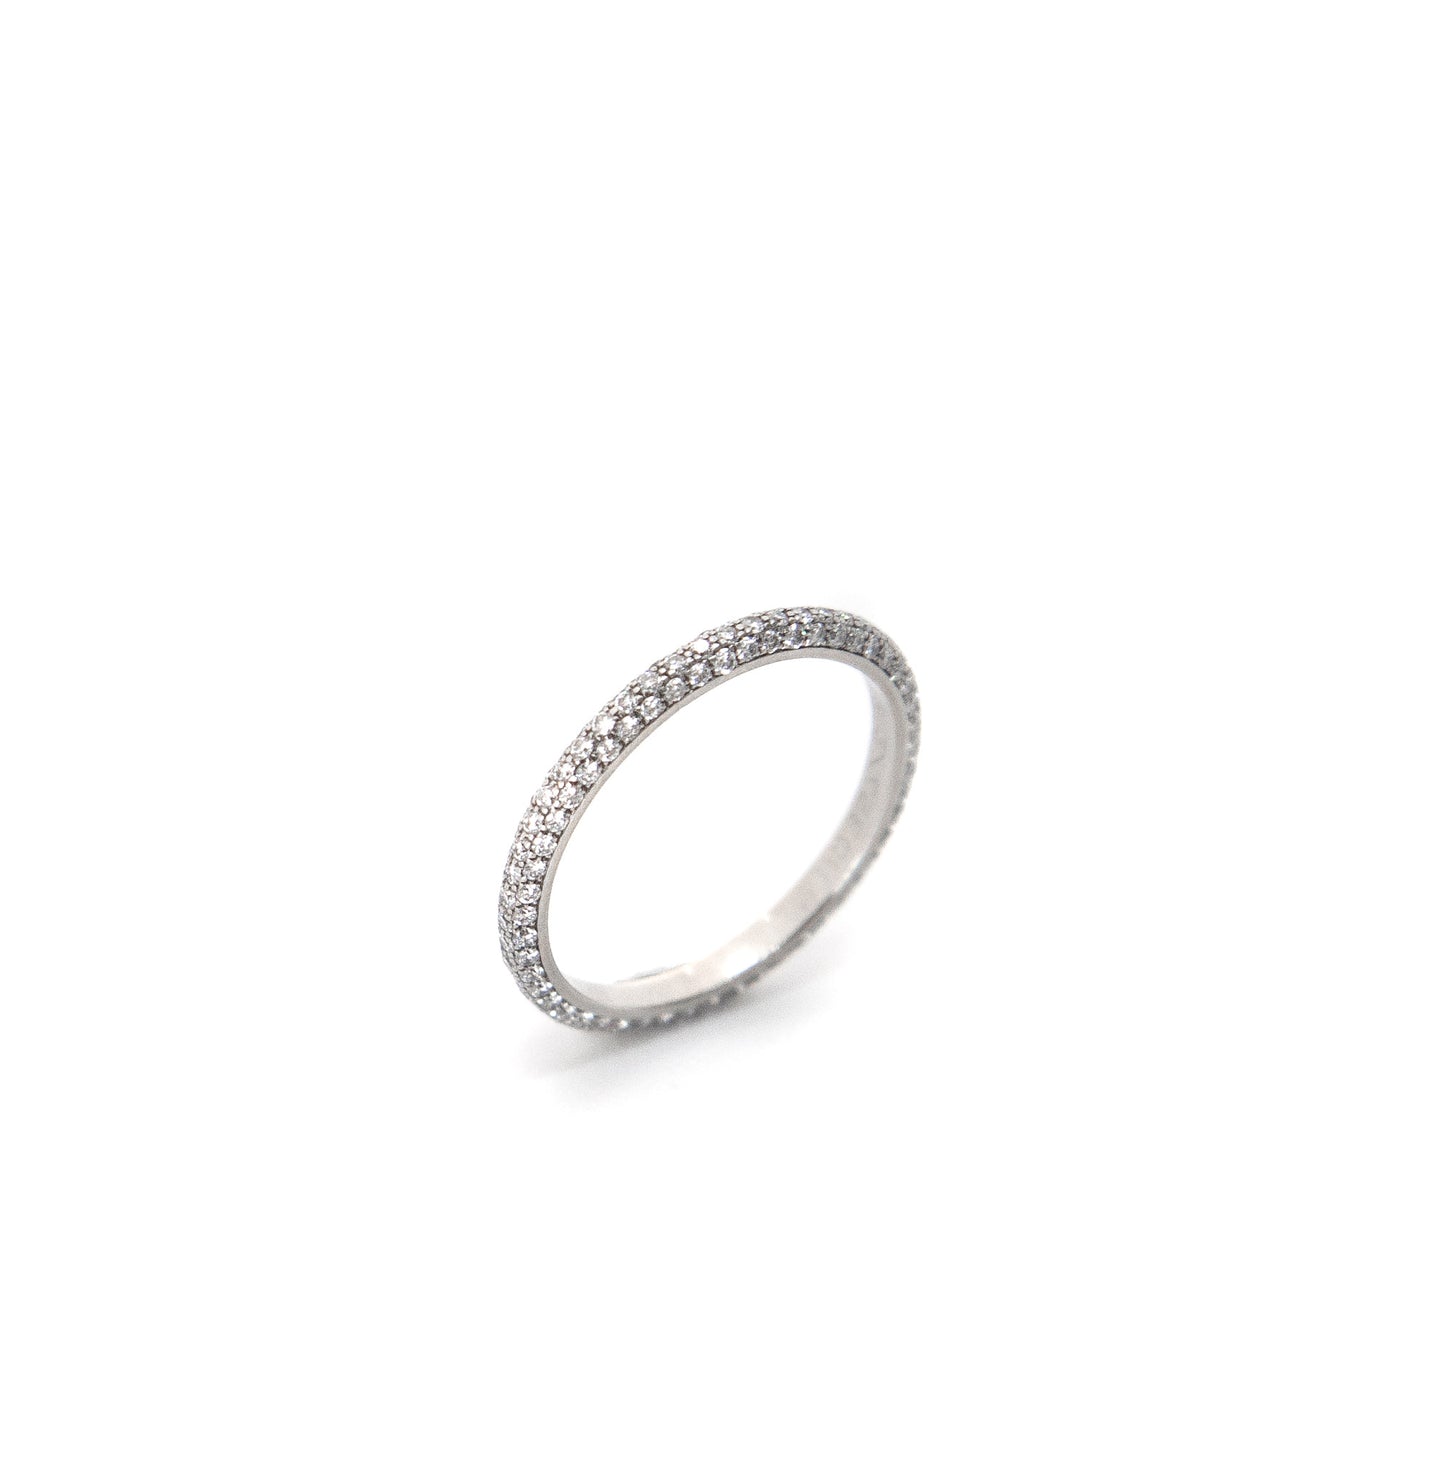 3 row delicate diamond band, perfect micropave wedding ring by Valentina Fine Jewellery Hong Kong